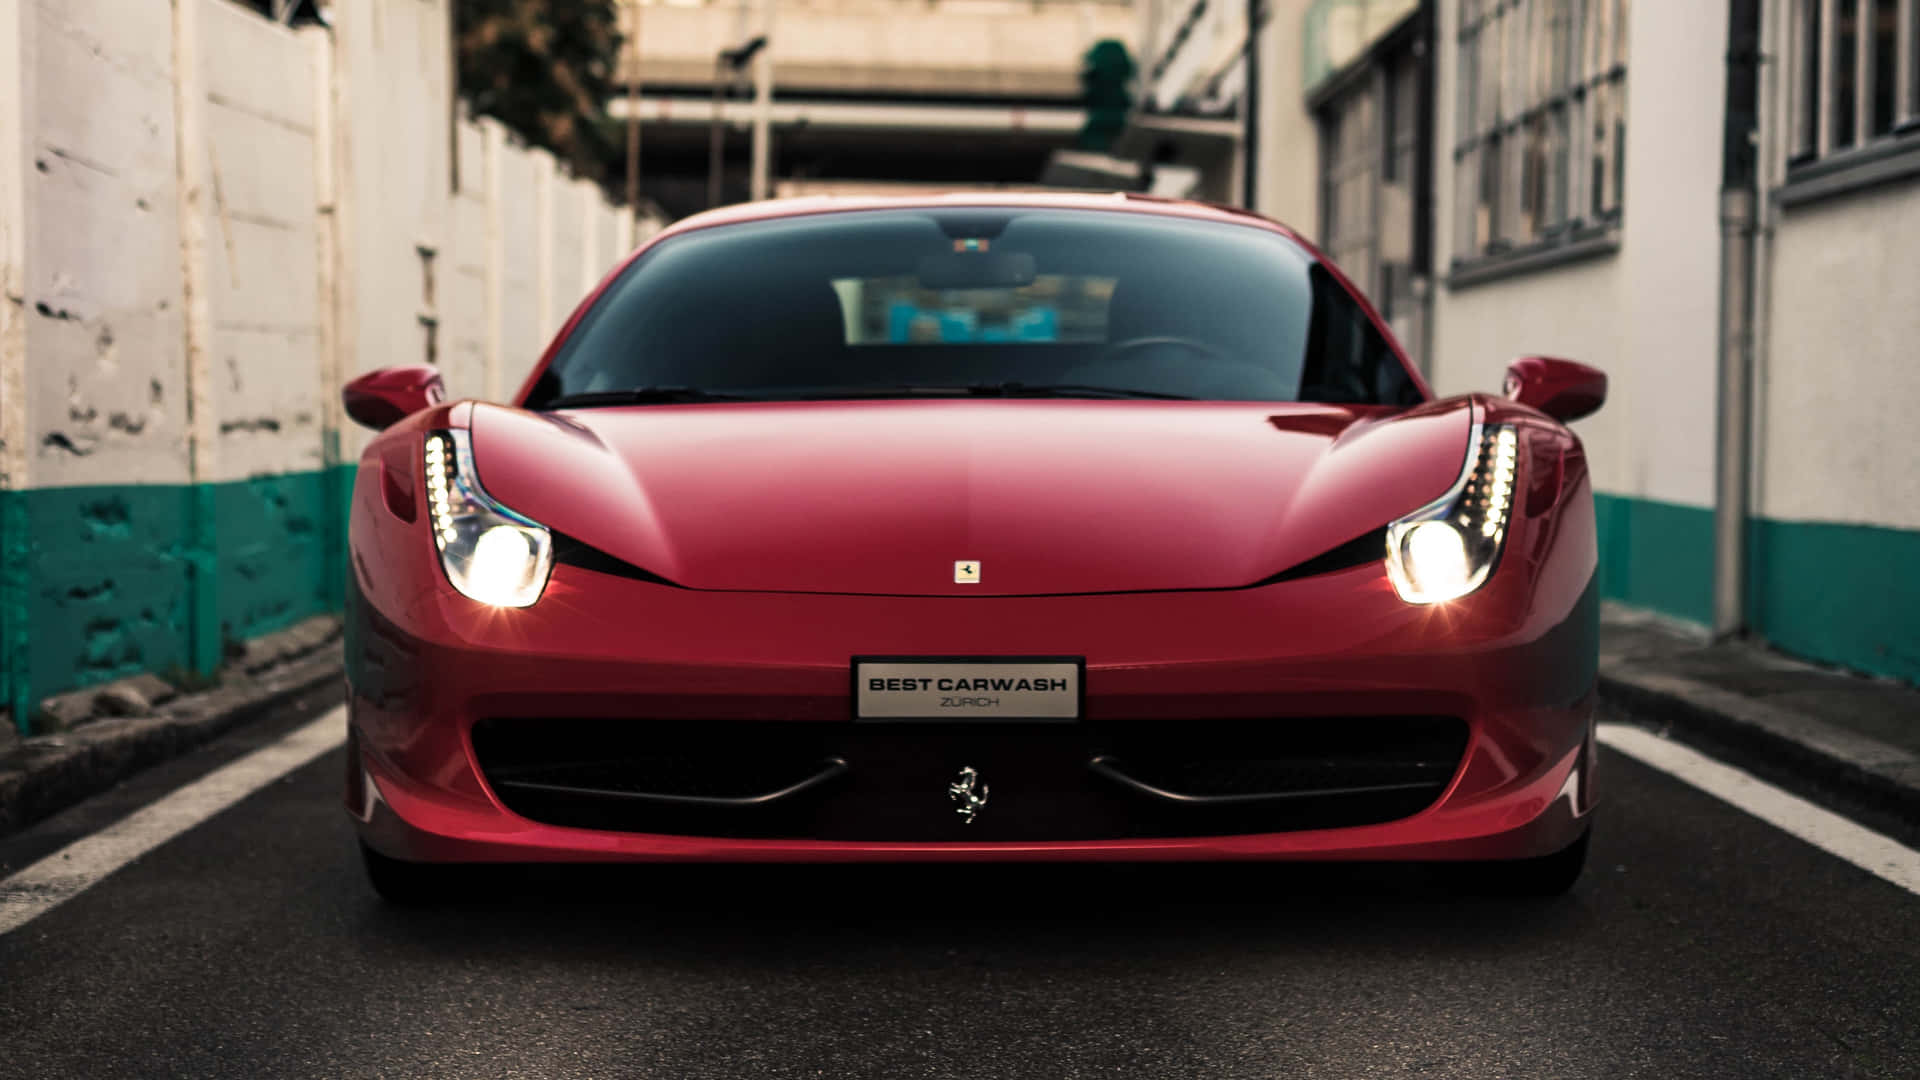 Drive in Luxury with Cool Ferrari Cars Wallpaper